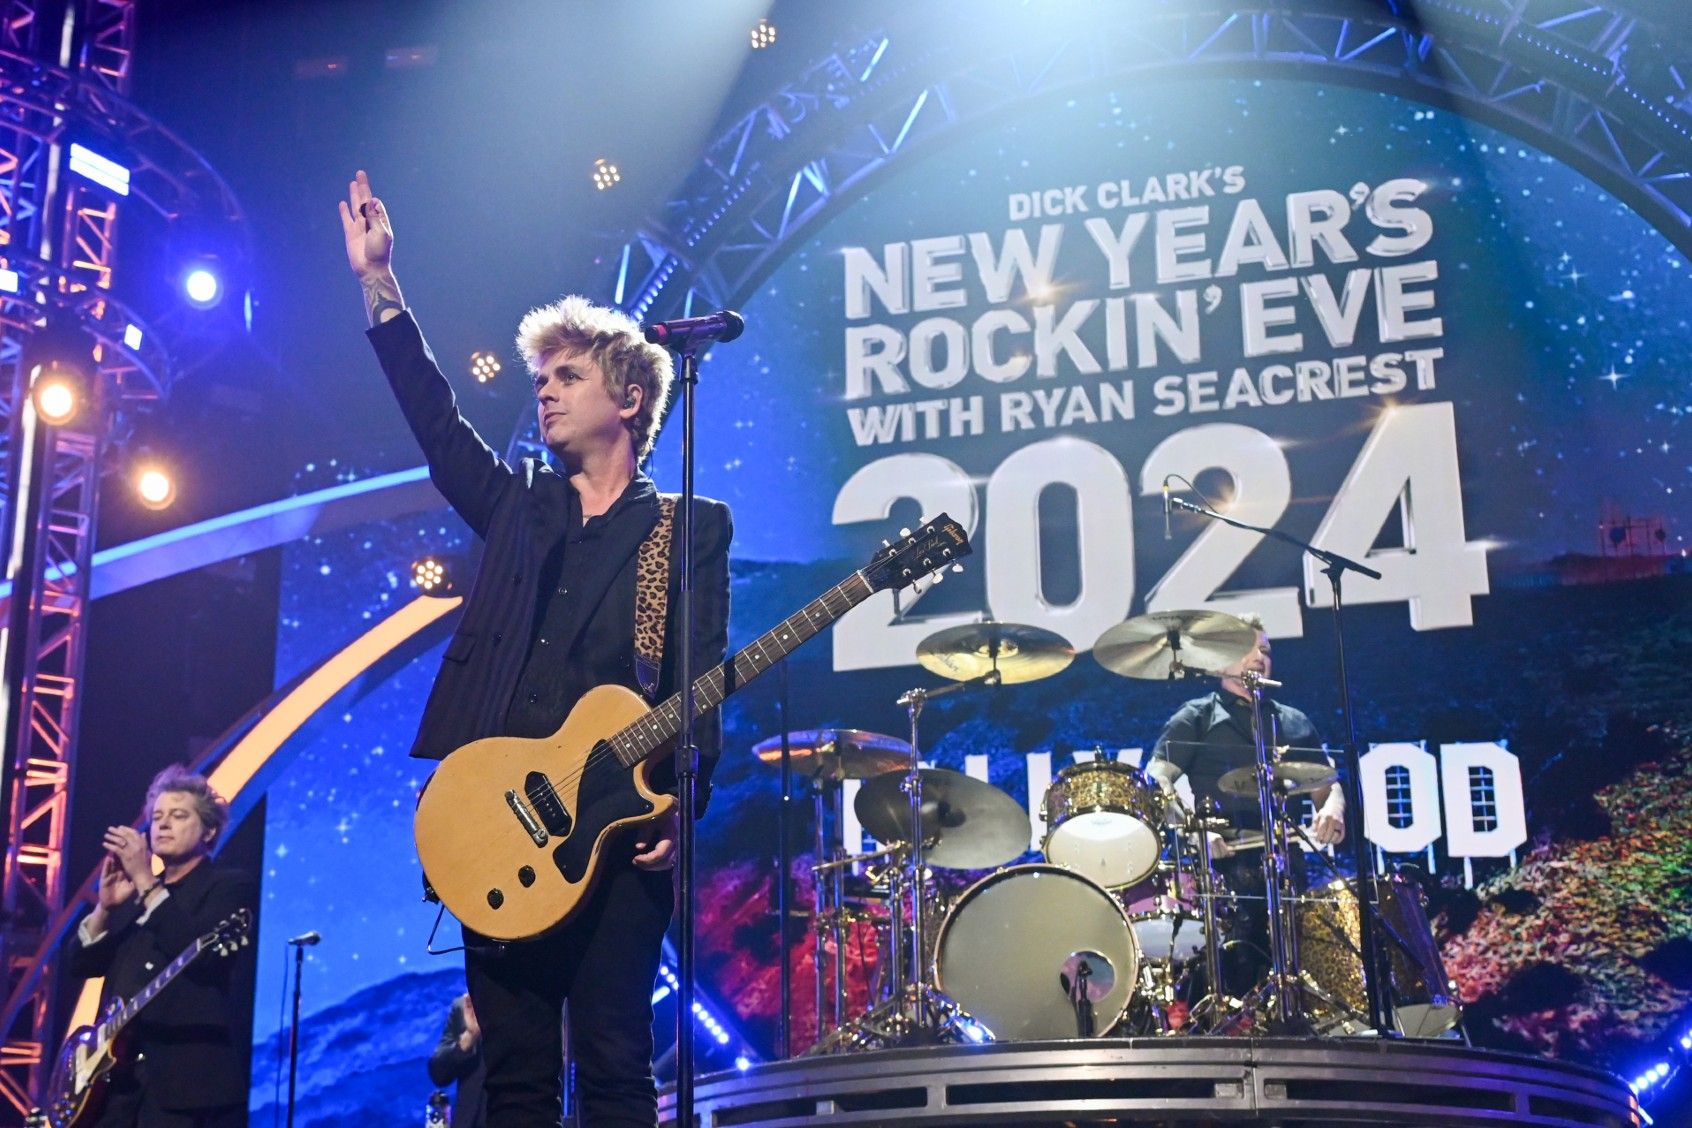 Green Day bashes Trump during NYE show